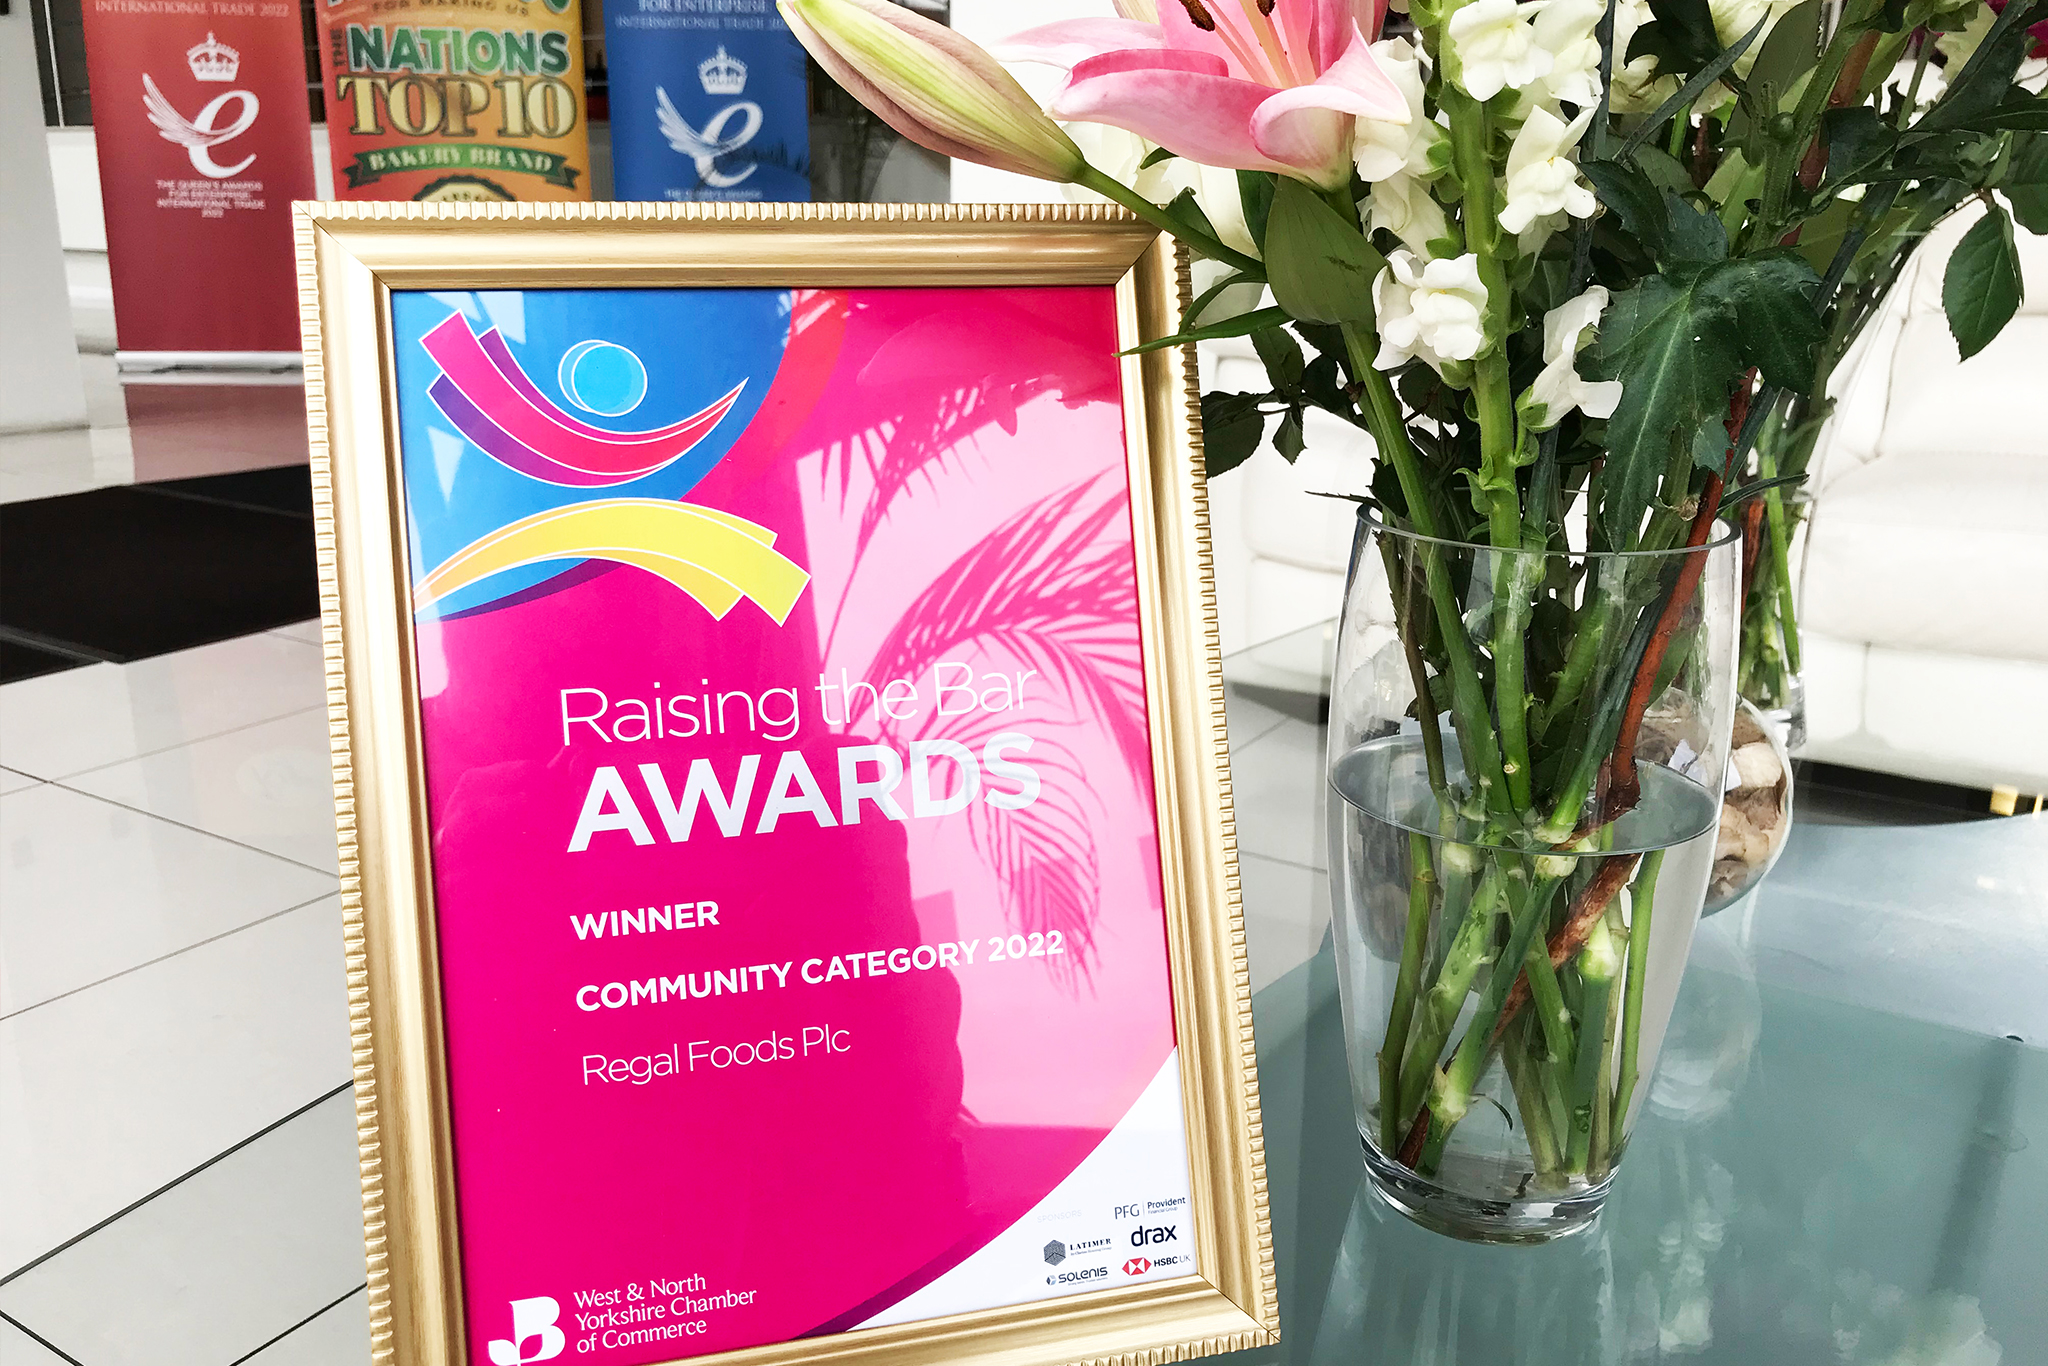 Regal Food Products Group Plc are thrilled to have won the Community Award at the West & North Yorkshire Chamber of Commerce Raising the Bar Awards.